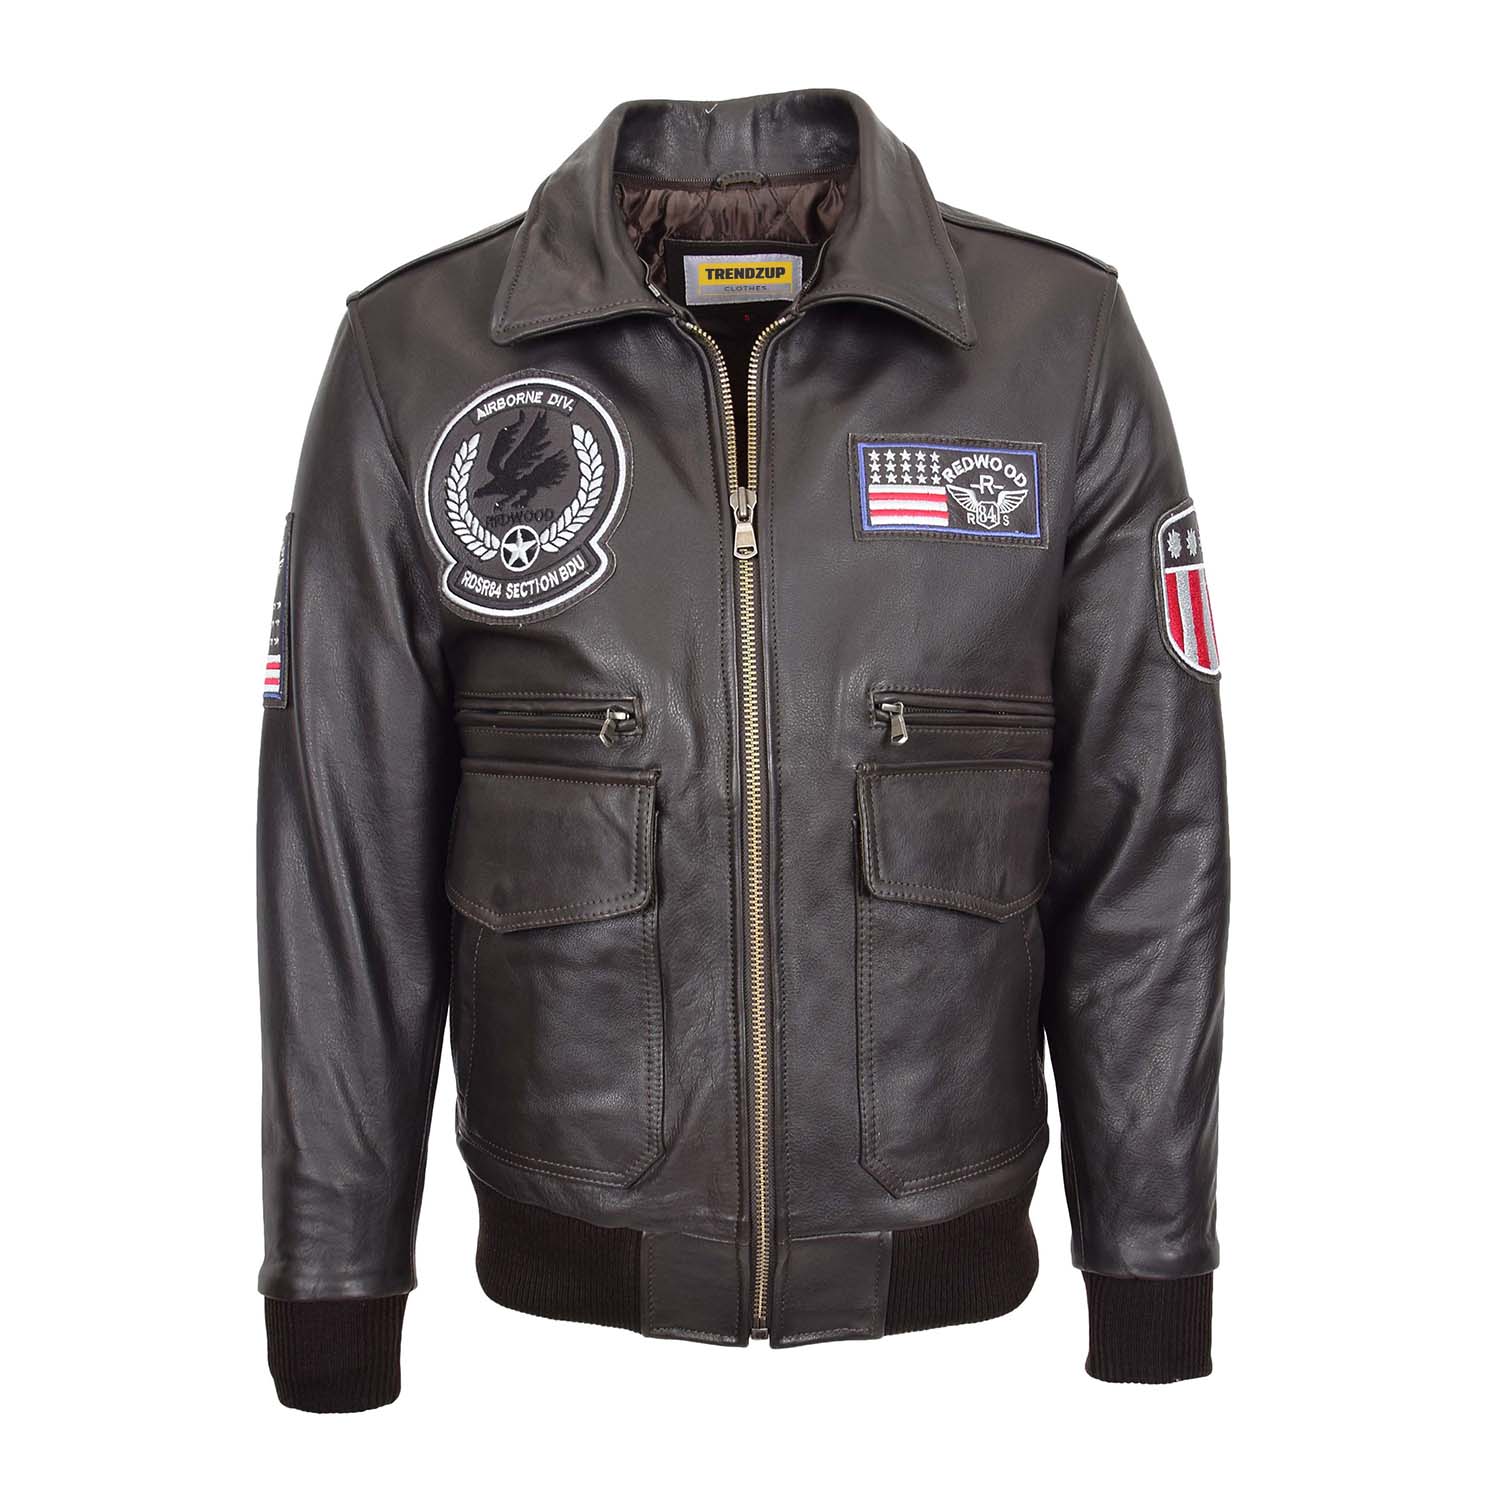 Mens Leather Bomber Jacket with Detachable Collar Arthur Brown